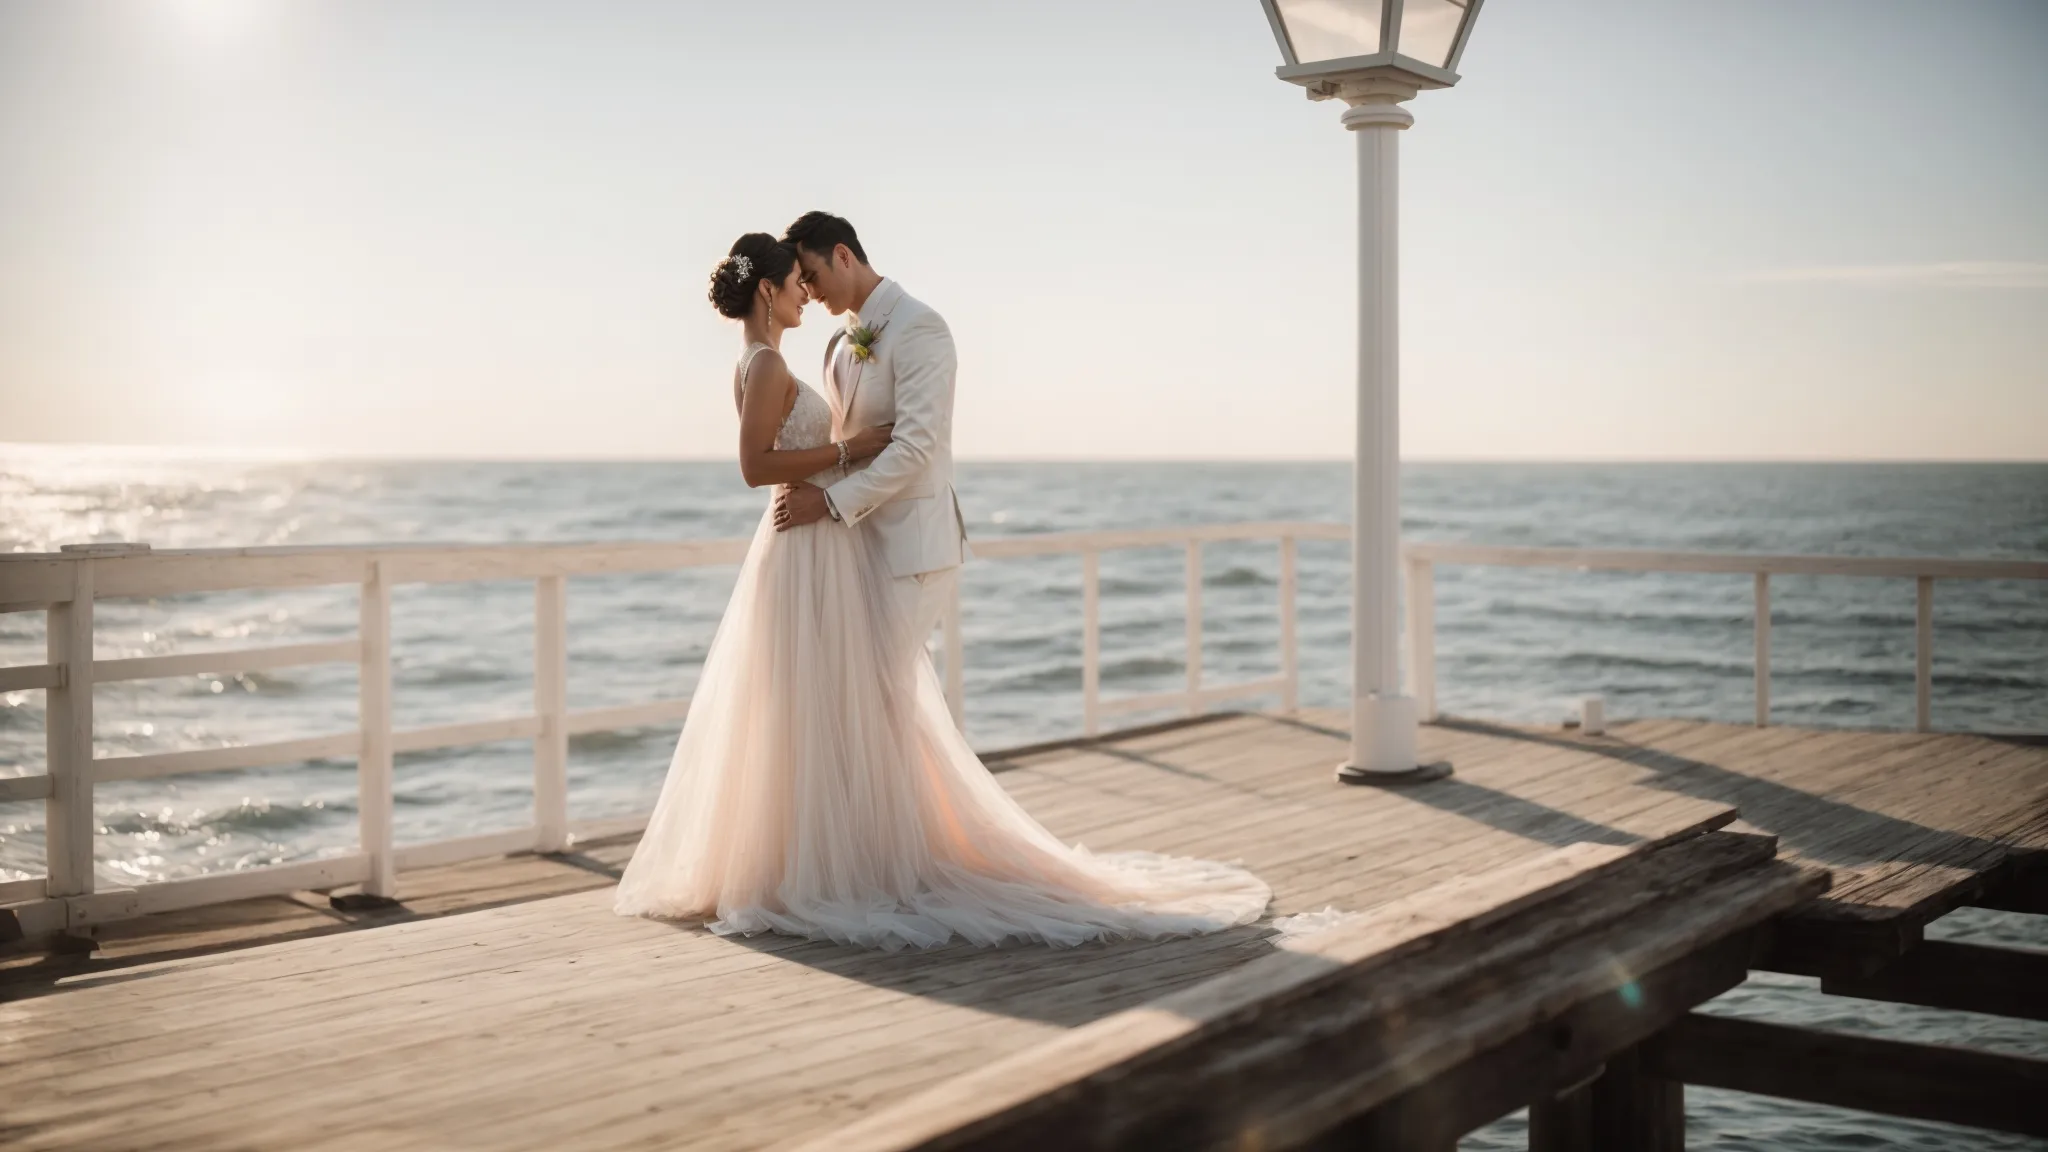 a bride and groom share a tender moment on a sunlit pier with the ocean as their backdrop.